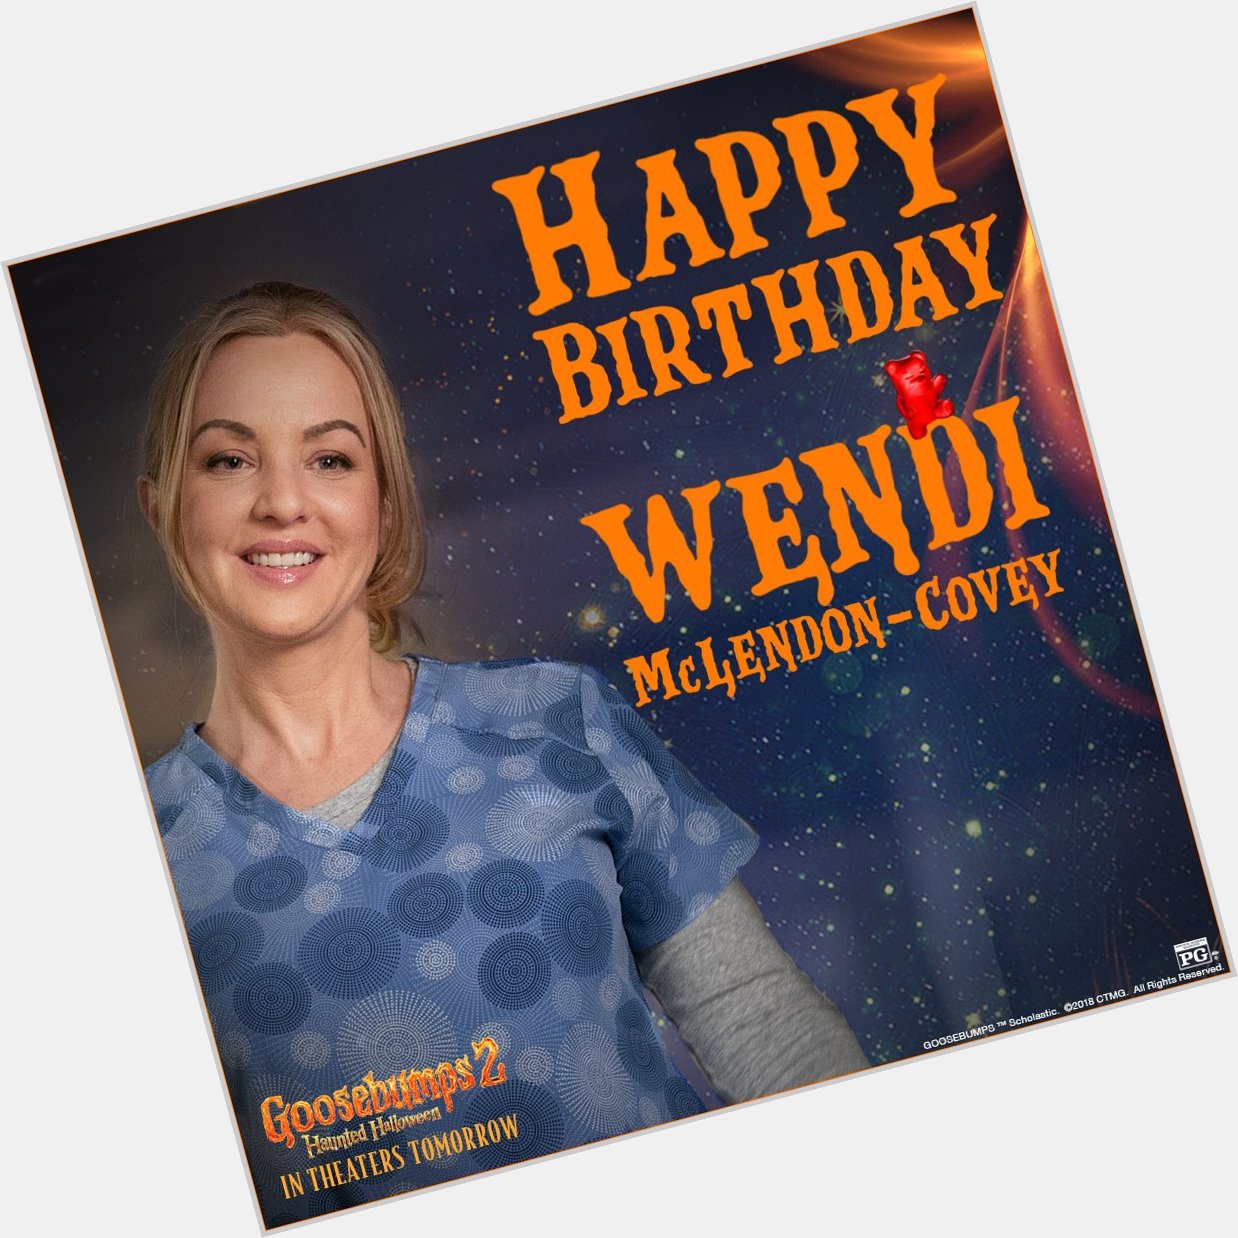 Happy birthday to the spook-tacular Wendi McLendon-Covey! 